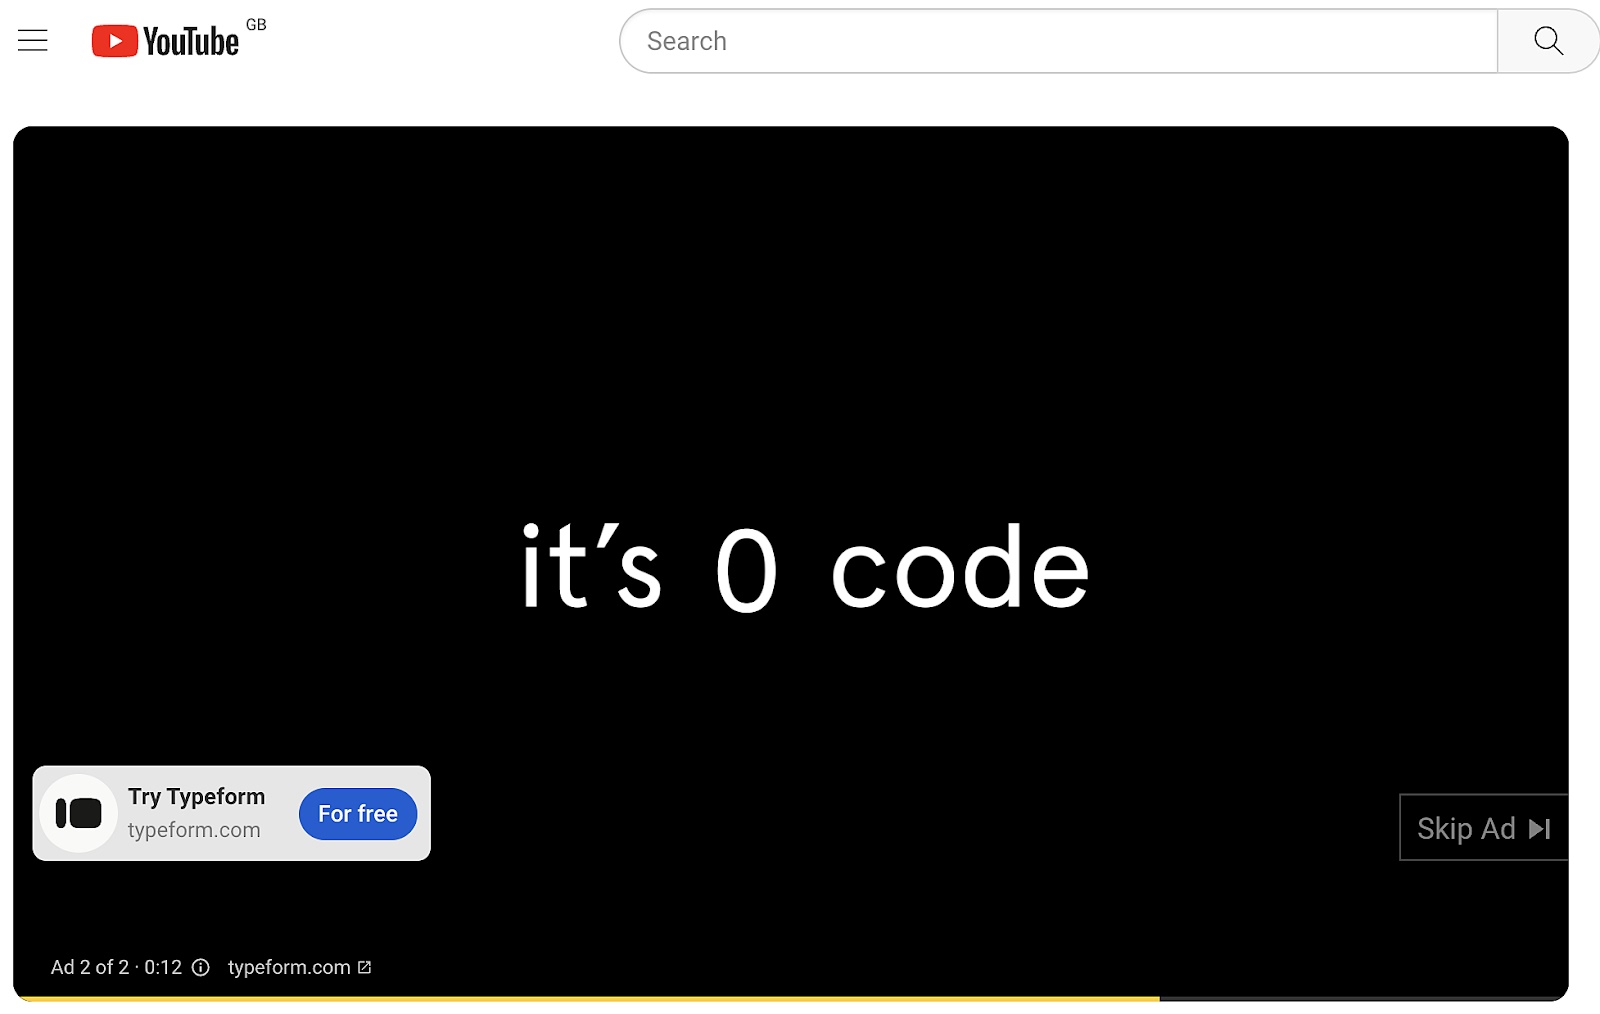 A screenshot of Typeform's video ad with "it's 0 code" copy